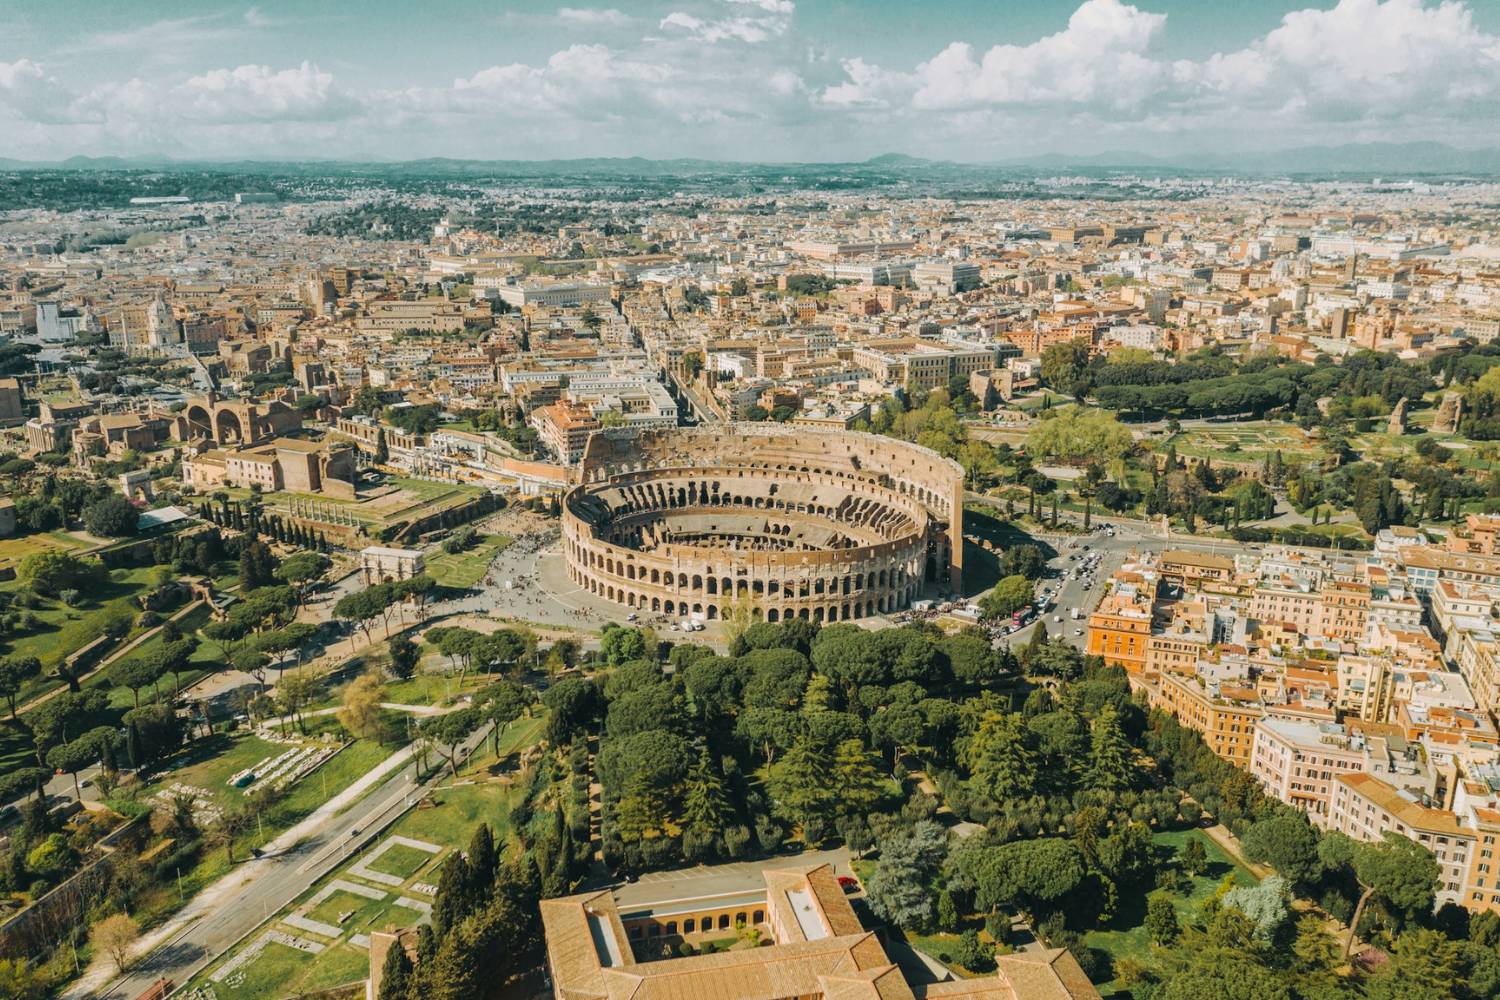 An aerial shot of the Colosseum in Rome which captures the great scenery and nature